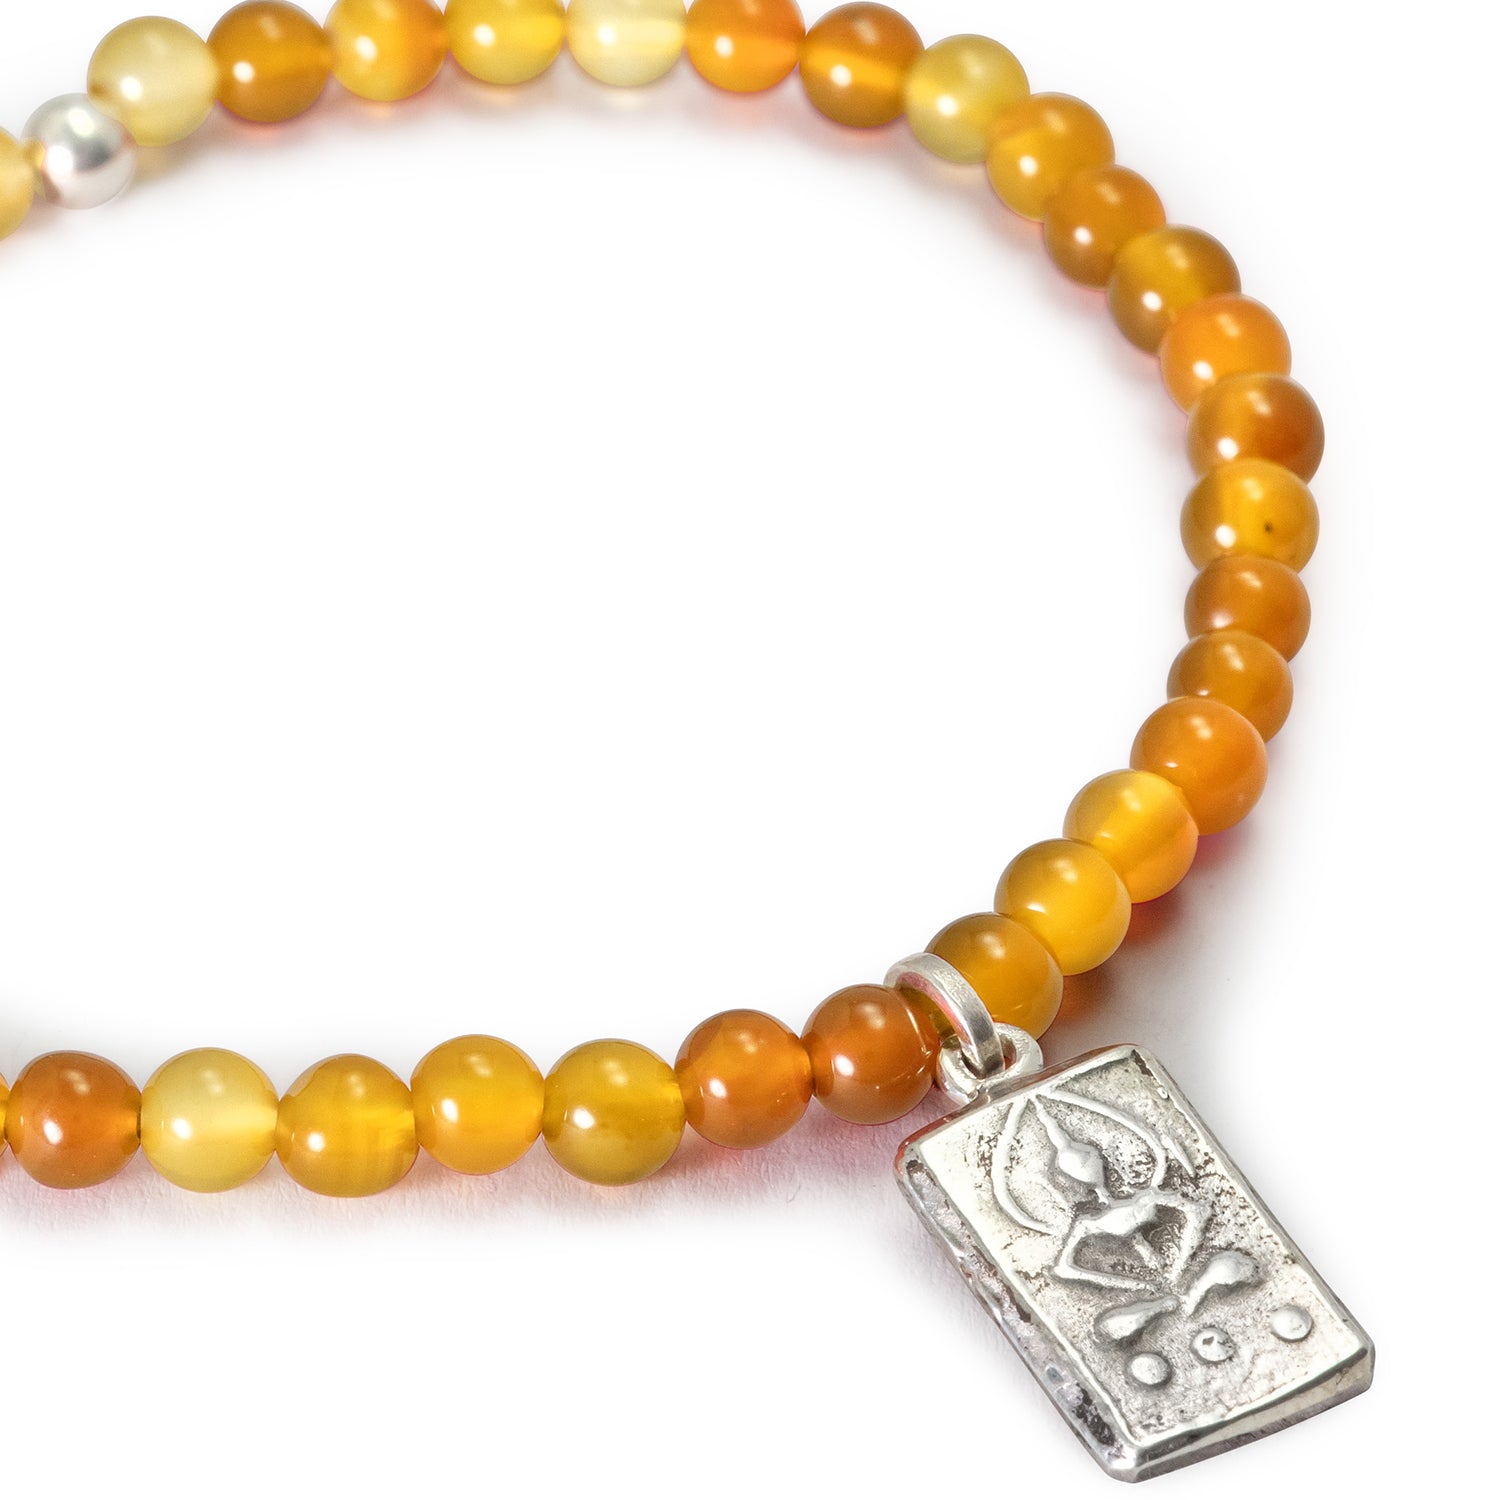 Buddha gemstone bracelet with calcite beads and pendant in silver from ETERNAL BLISS - Spiritual jewelry